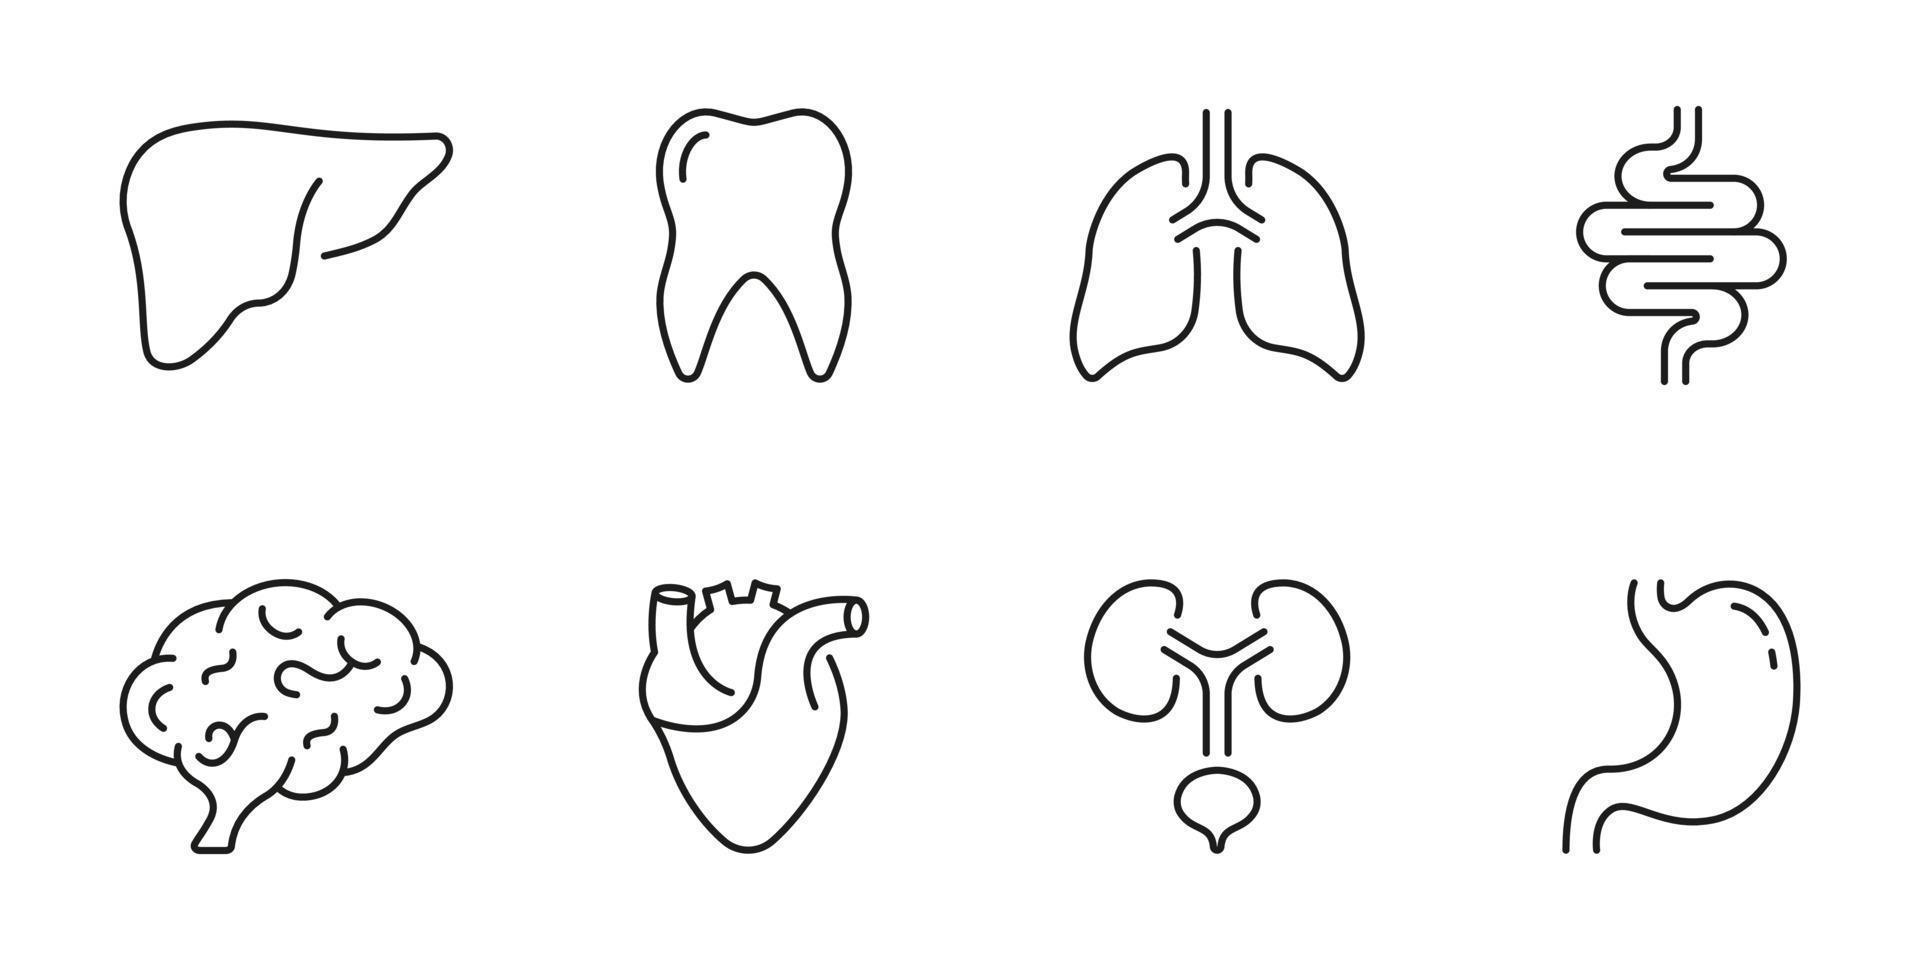 Healthcare Outline Icon, Internal Organ Anatomy. Human Brain, Intestine, Urinary System, Tooth, Stomach, Lung, Liver, Heart Line Icon Set. Editable Stroke. Isolated Vector Illustration.